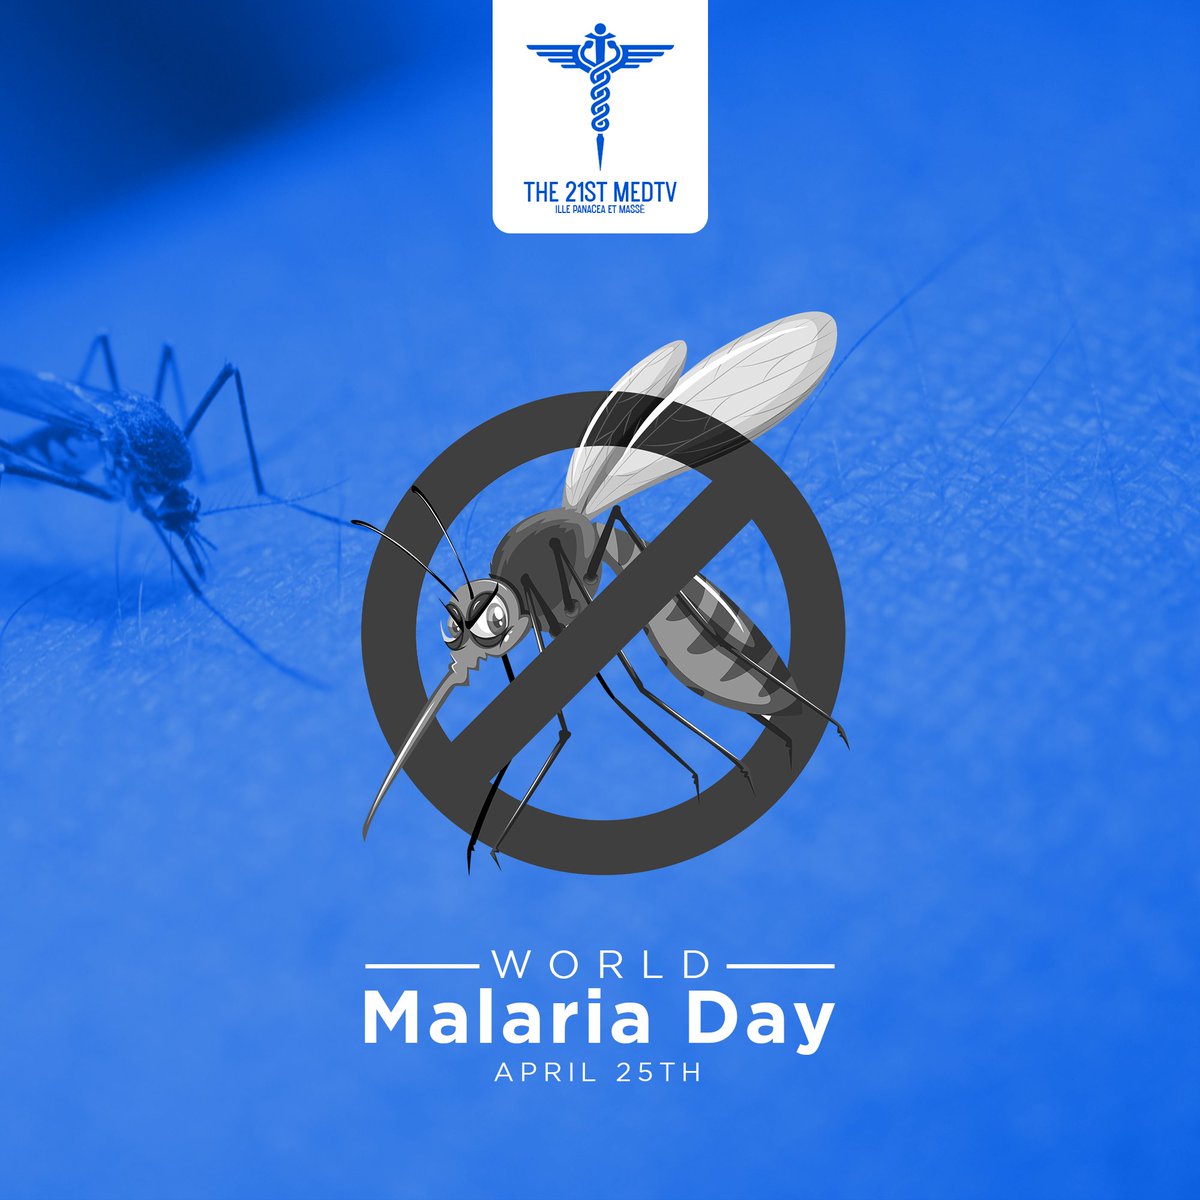 MALARIA
Malaria is caused by a parasitic protozoa of the genus Plasmodium. 
Four species cause disease in humans: P falciparum, P vivax, P ovale and P malariae.  

Plasmodium is a genus of unicellular eukaryotes that are obligate parasites of vertebrates and insects.